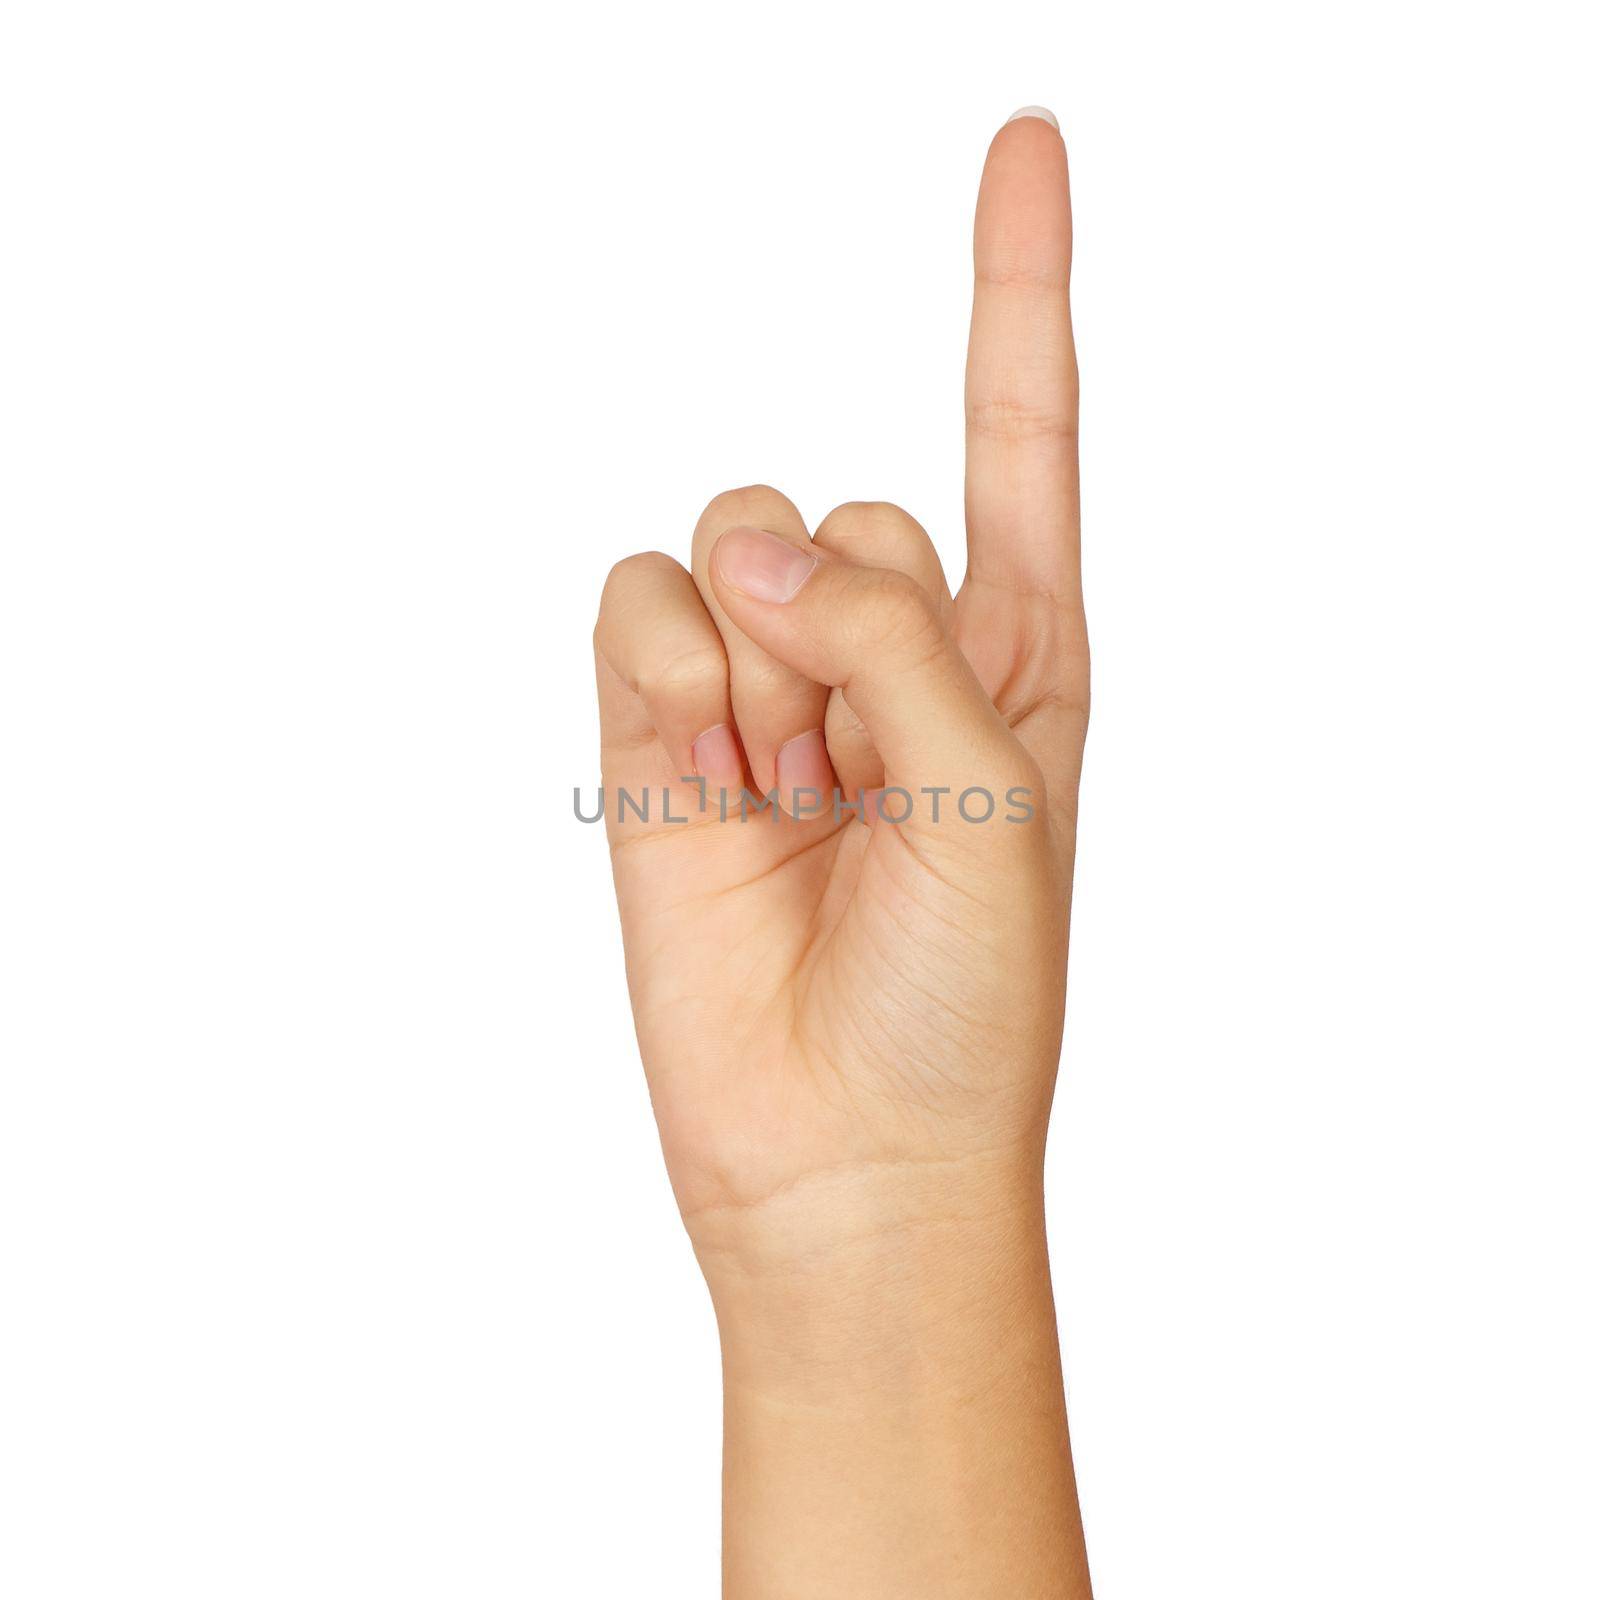 american sign language number 1. female hand gesturing isolated on white background